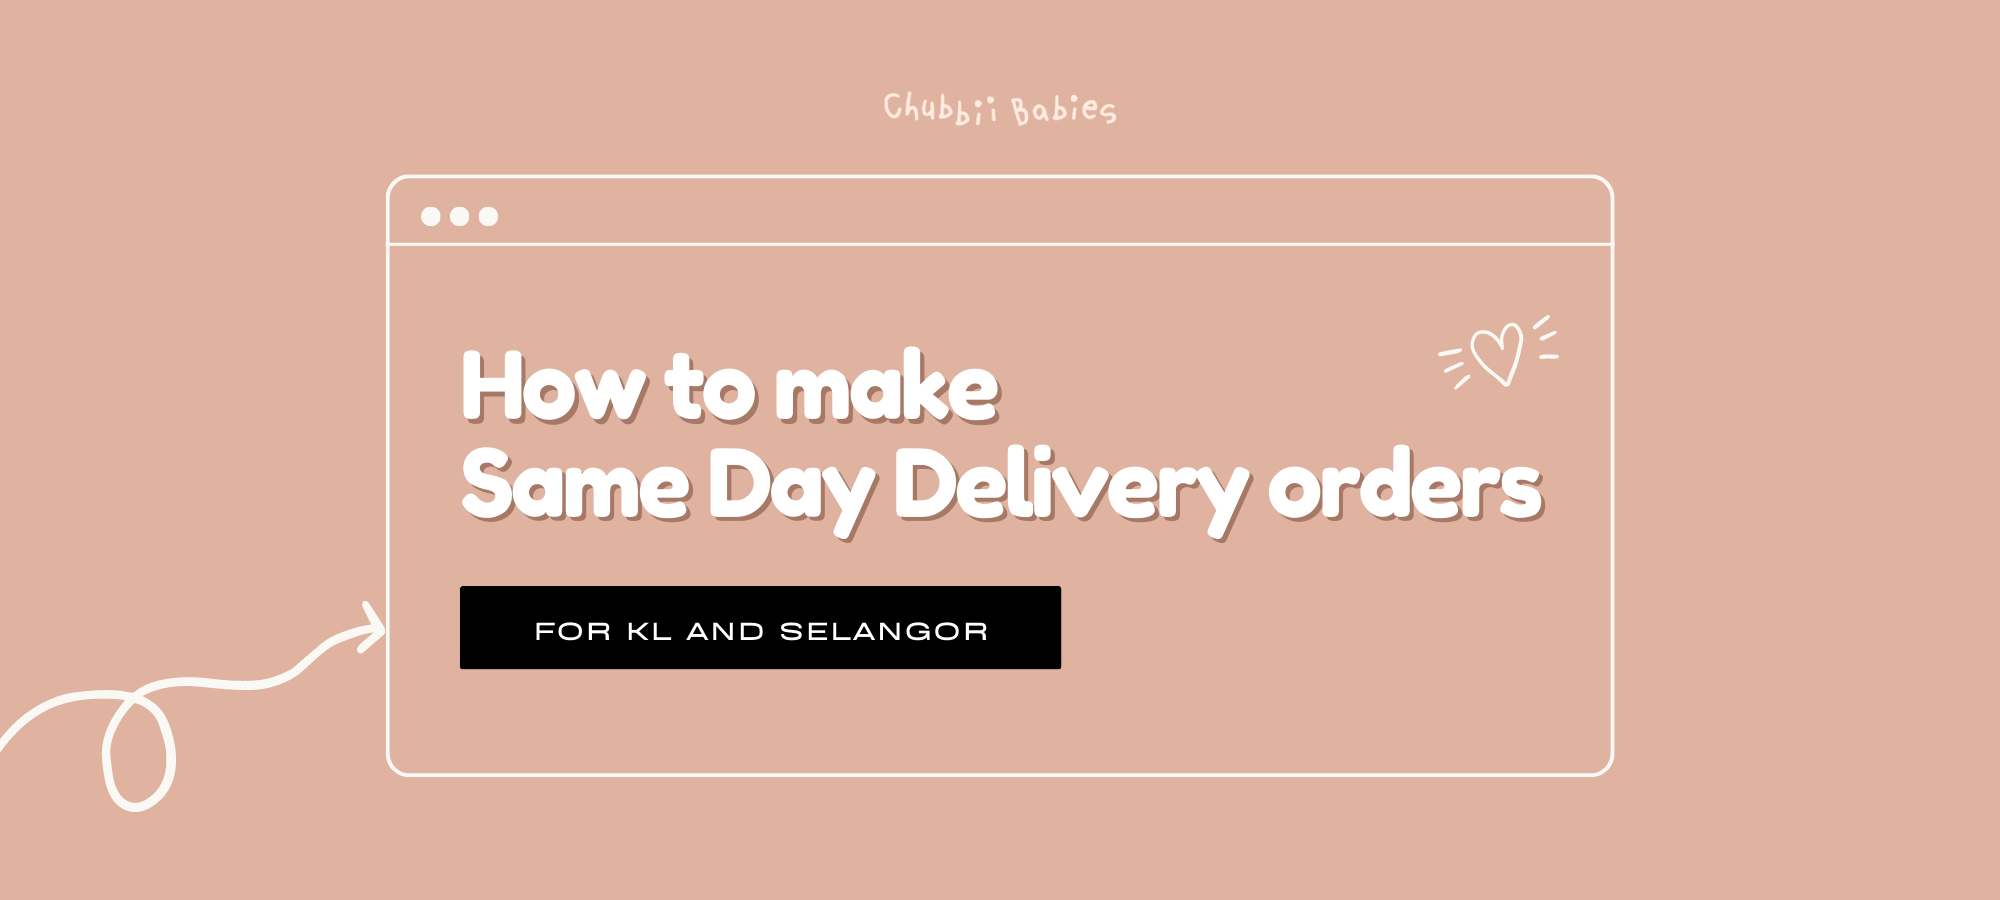 Same Day Delivery: A Step-by-Step Guide for KL and Selangor Customers